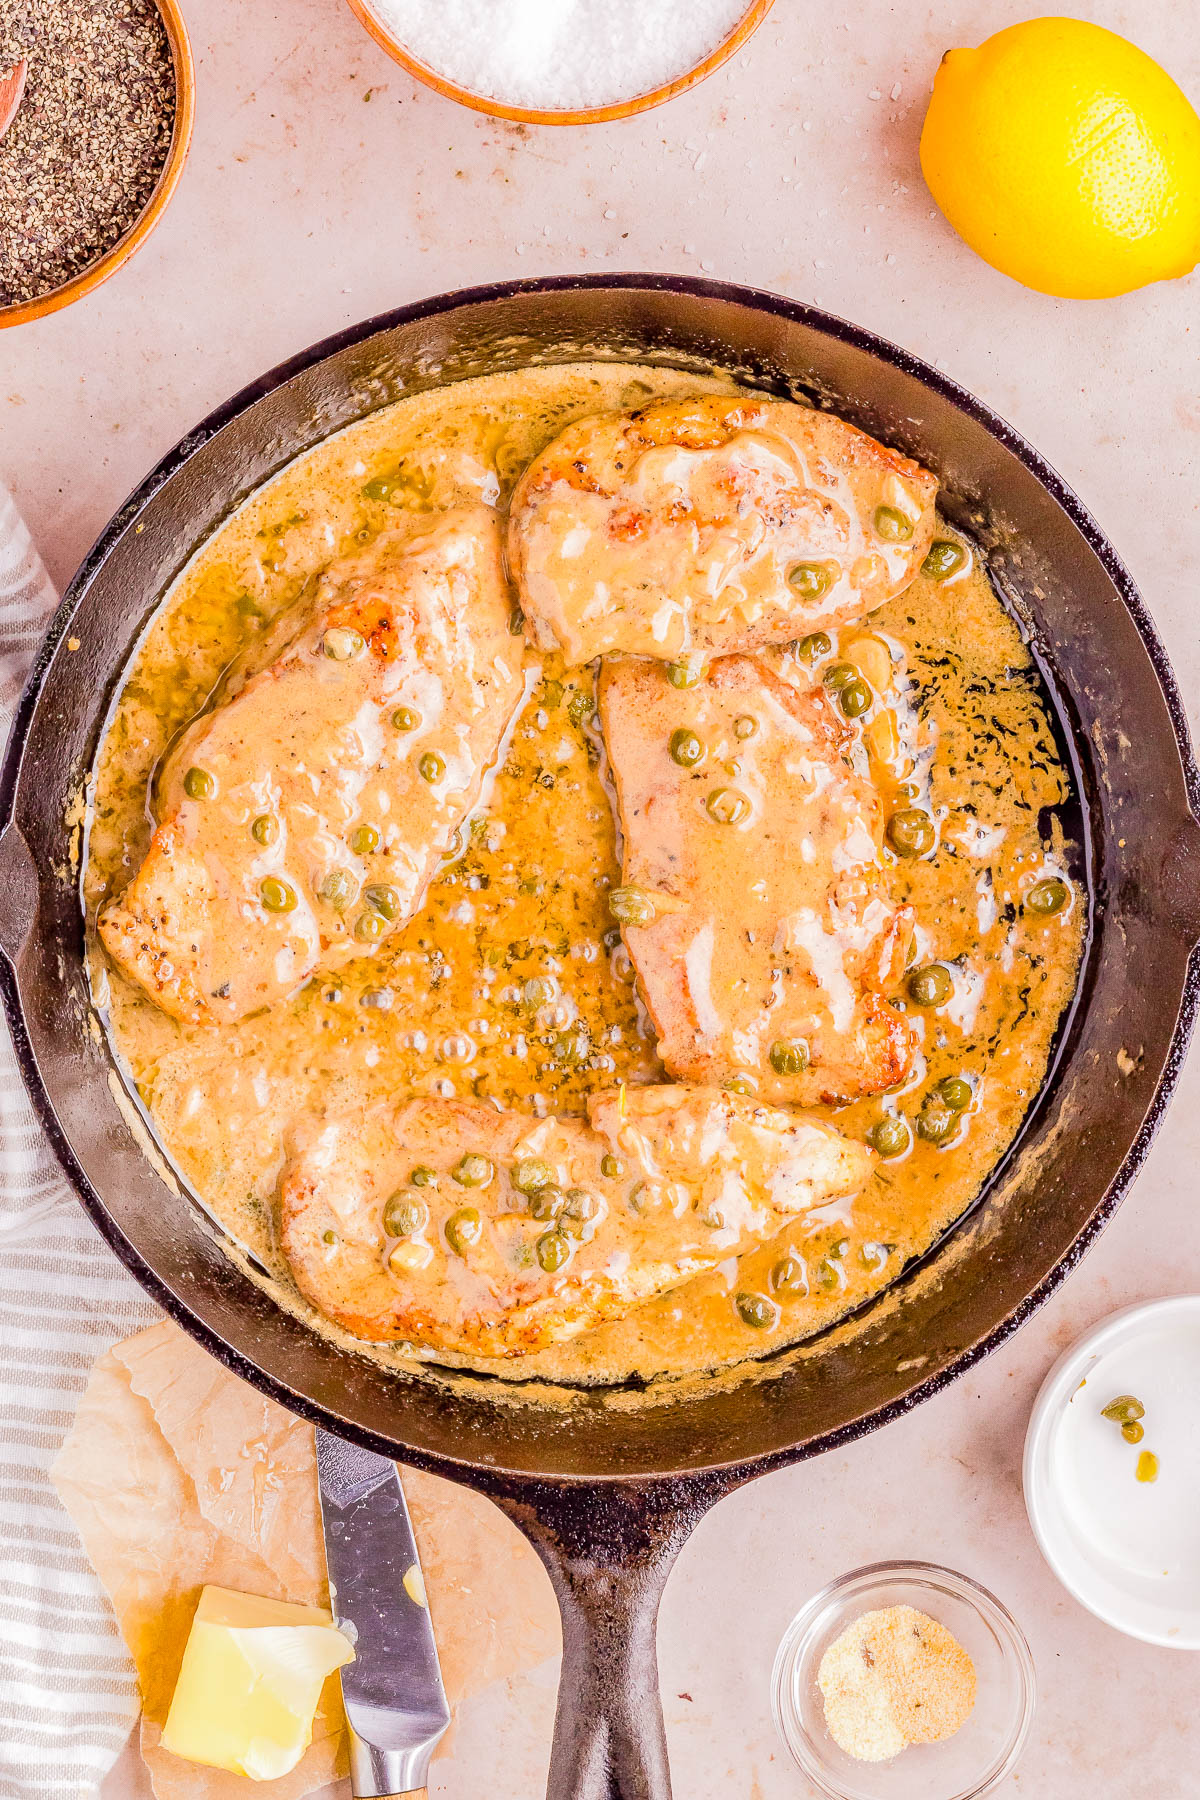 A skillet containing chicken breasts in a creamy sauce garnished with green onions, with ingredients like lemon, cheese, and spices nearby.